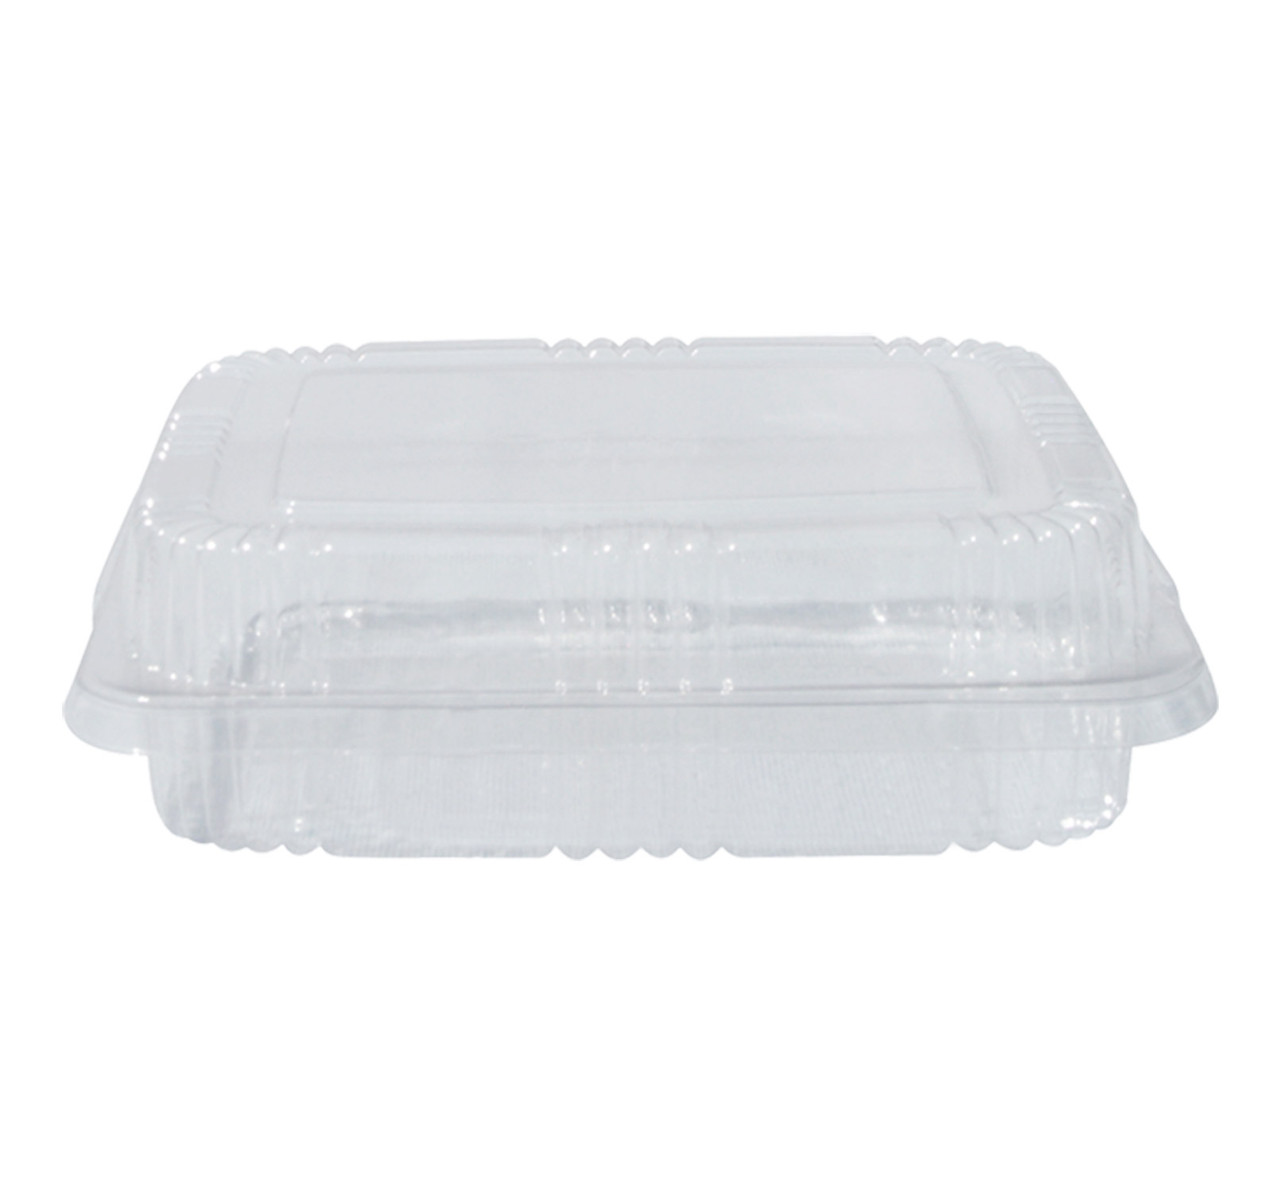 Genpak 4 oz. Clear Hinged Deli Container - 100/Pack